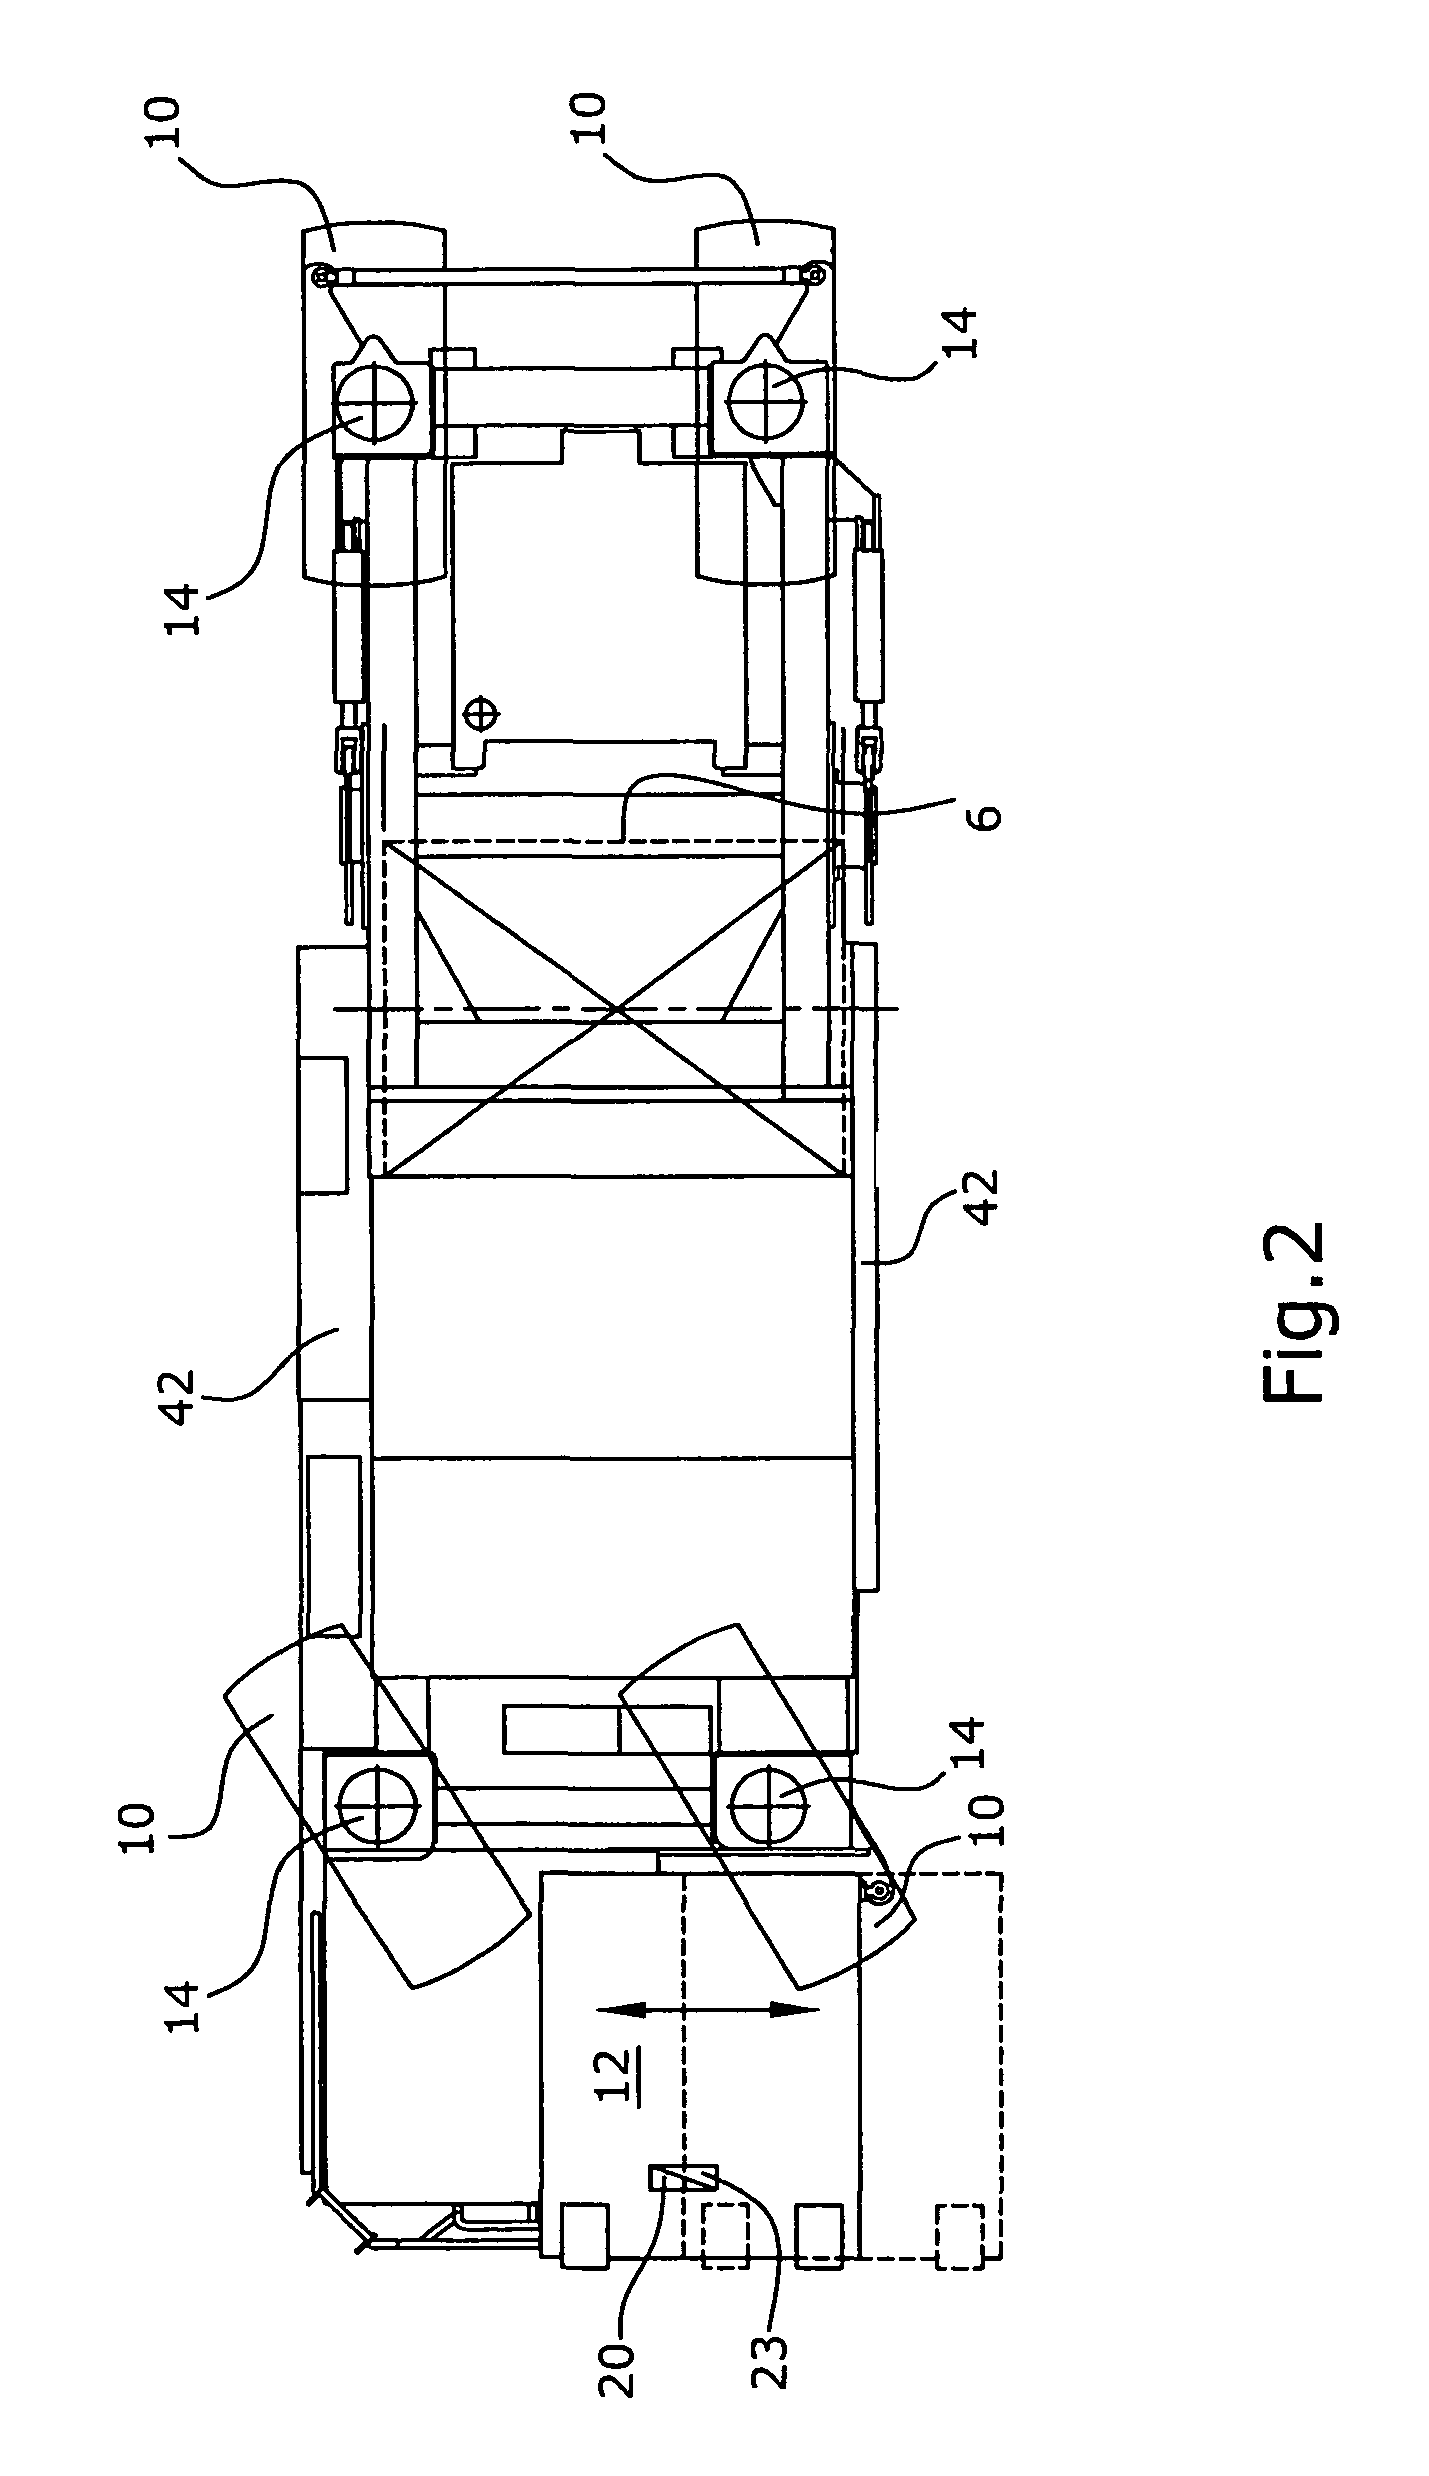 Automotive construction engine and lifting column for a contruction engine